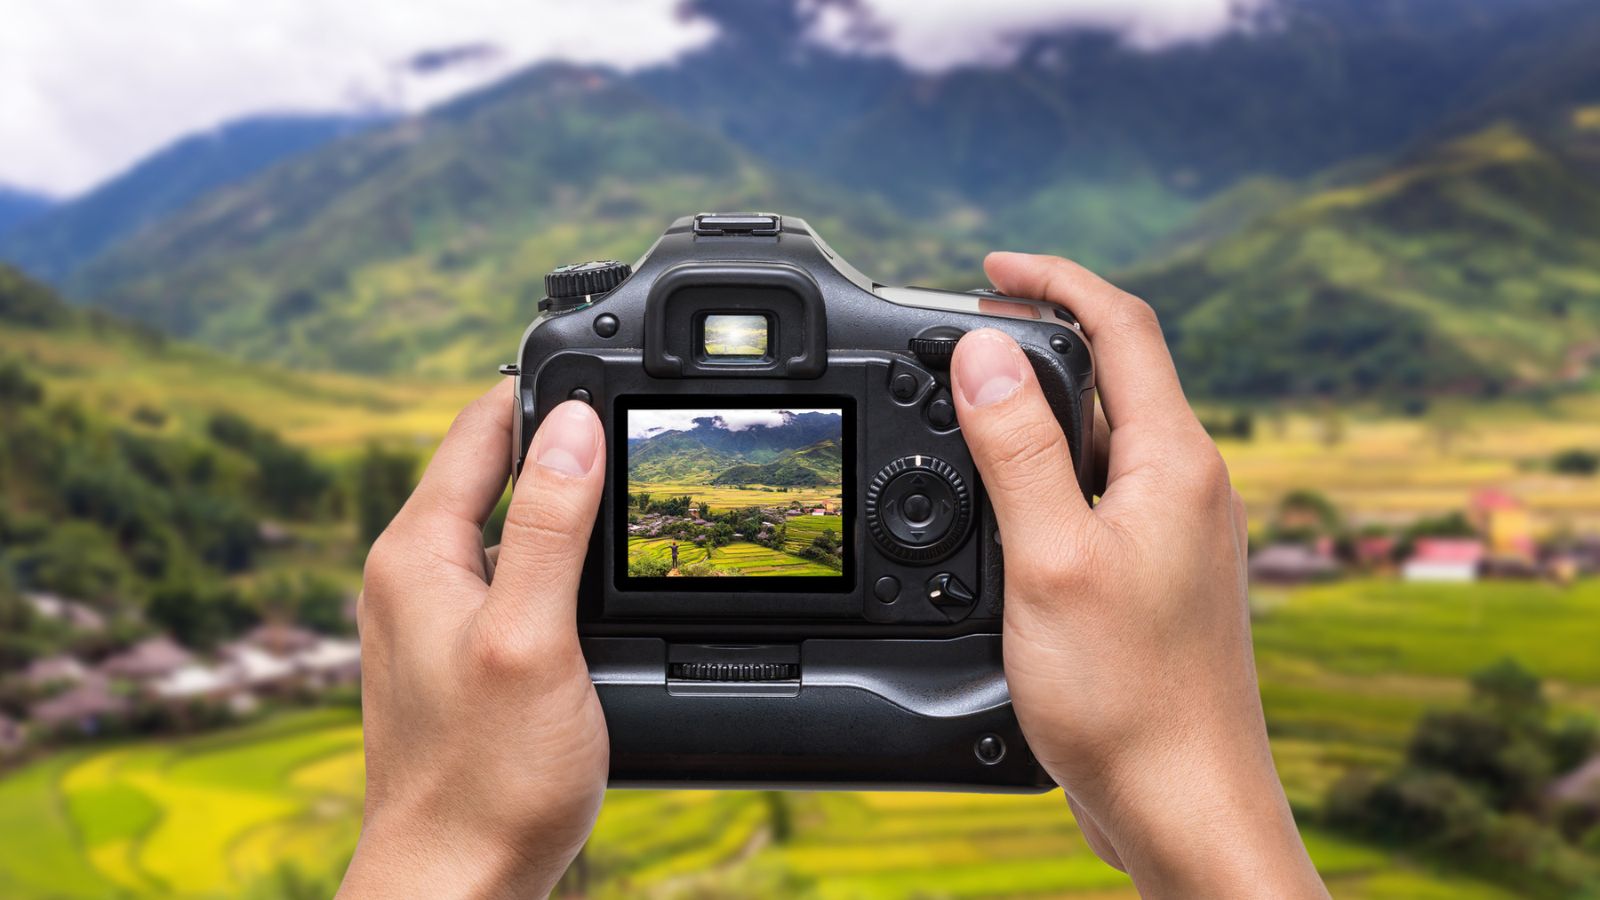 <p><span>Photographers are in high demand for travel-related work. Whether you take photos of stunning landscapes or capture images of people, photography is an amazing way to see the world and get paid. </span></p><p><span>Currently, exploring social media with your photos can be very profitable. Build a following on Instagram or YouTube to monetize your travel photography.</span></p>